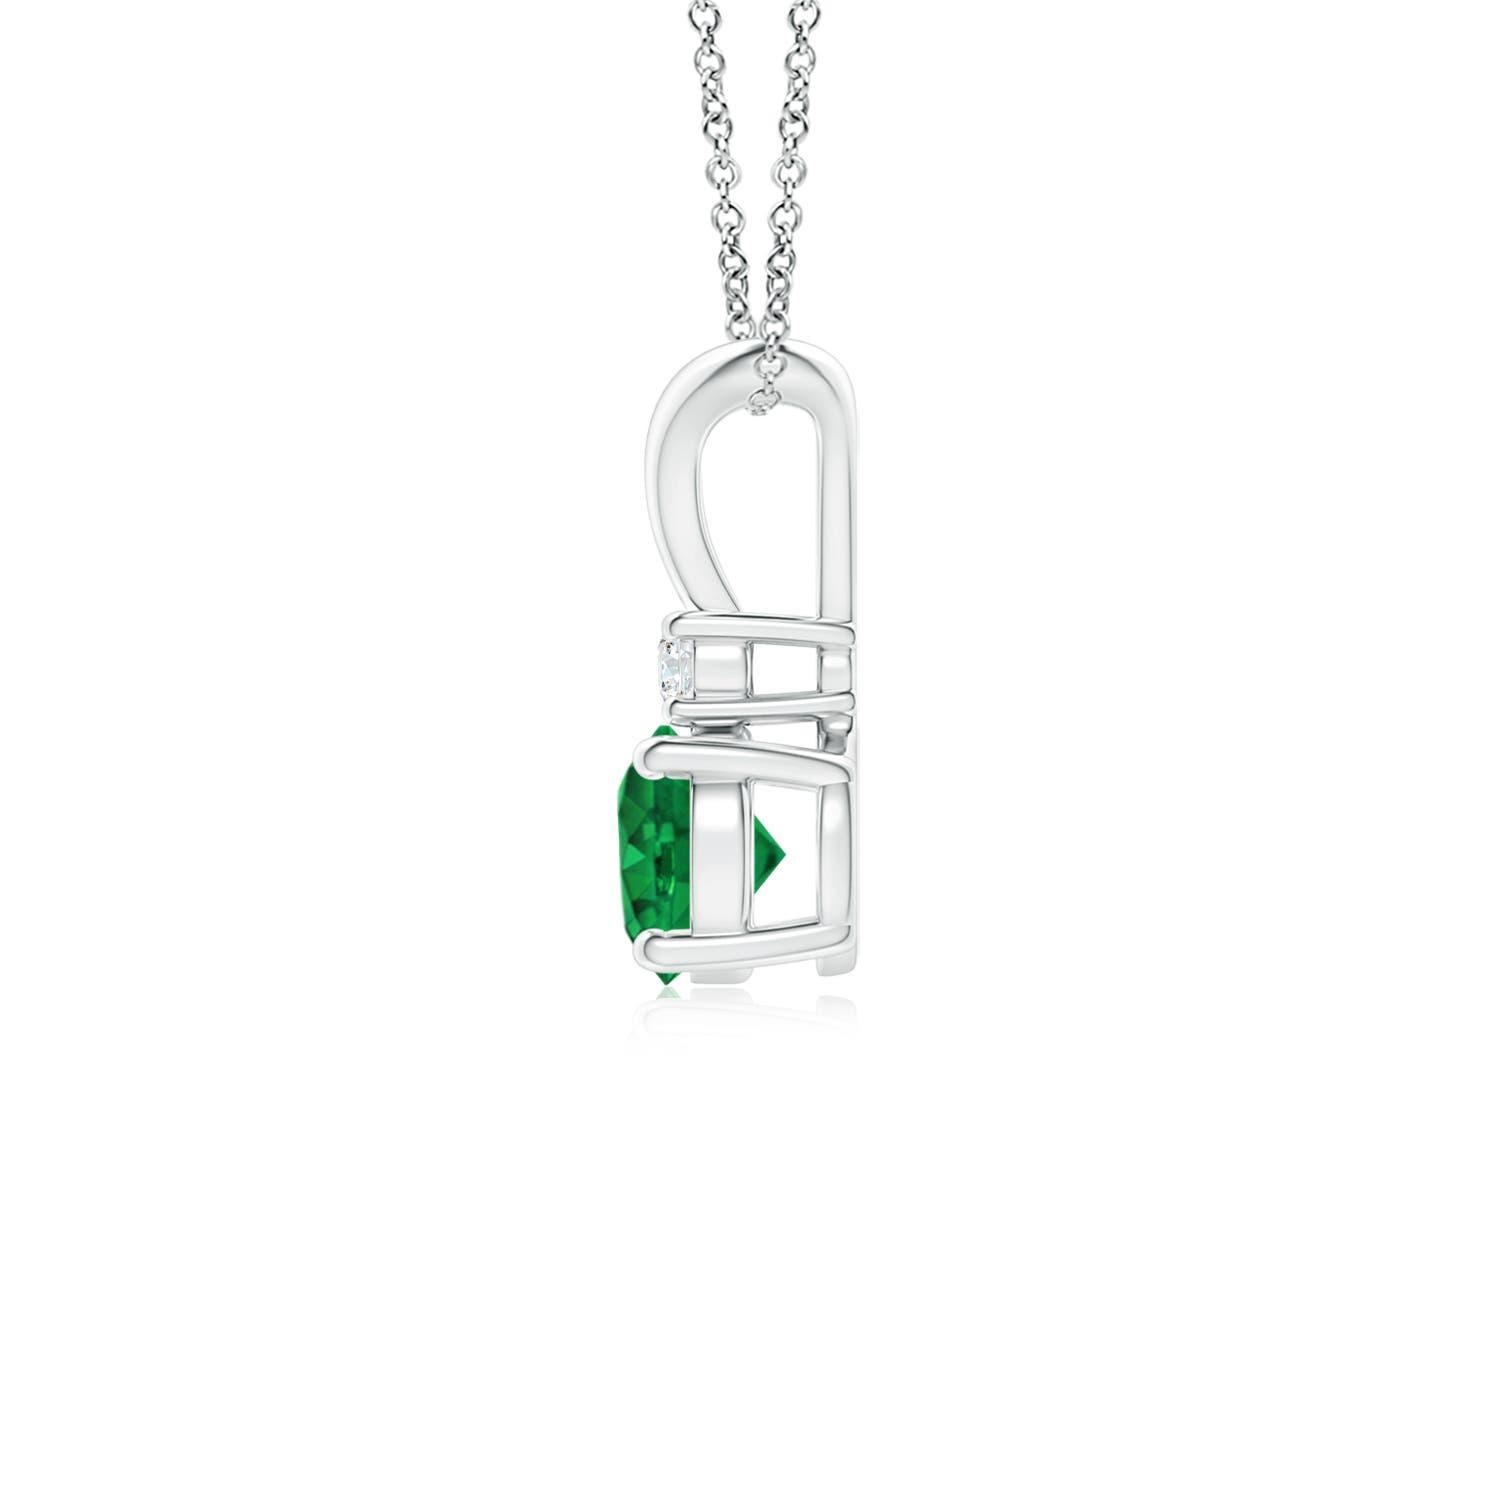 This four-prong set emerald pendant displays the perfect blend of style and beauty. A radiant diamond on top of the lush green gemstone enhances its charm. This classic solitaire emerald pendant with a polished v-bale is artfully designed in 14k